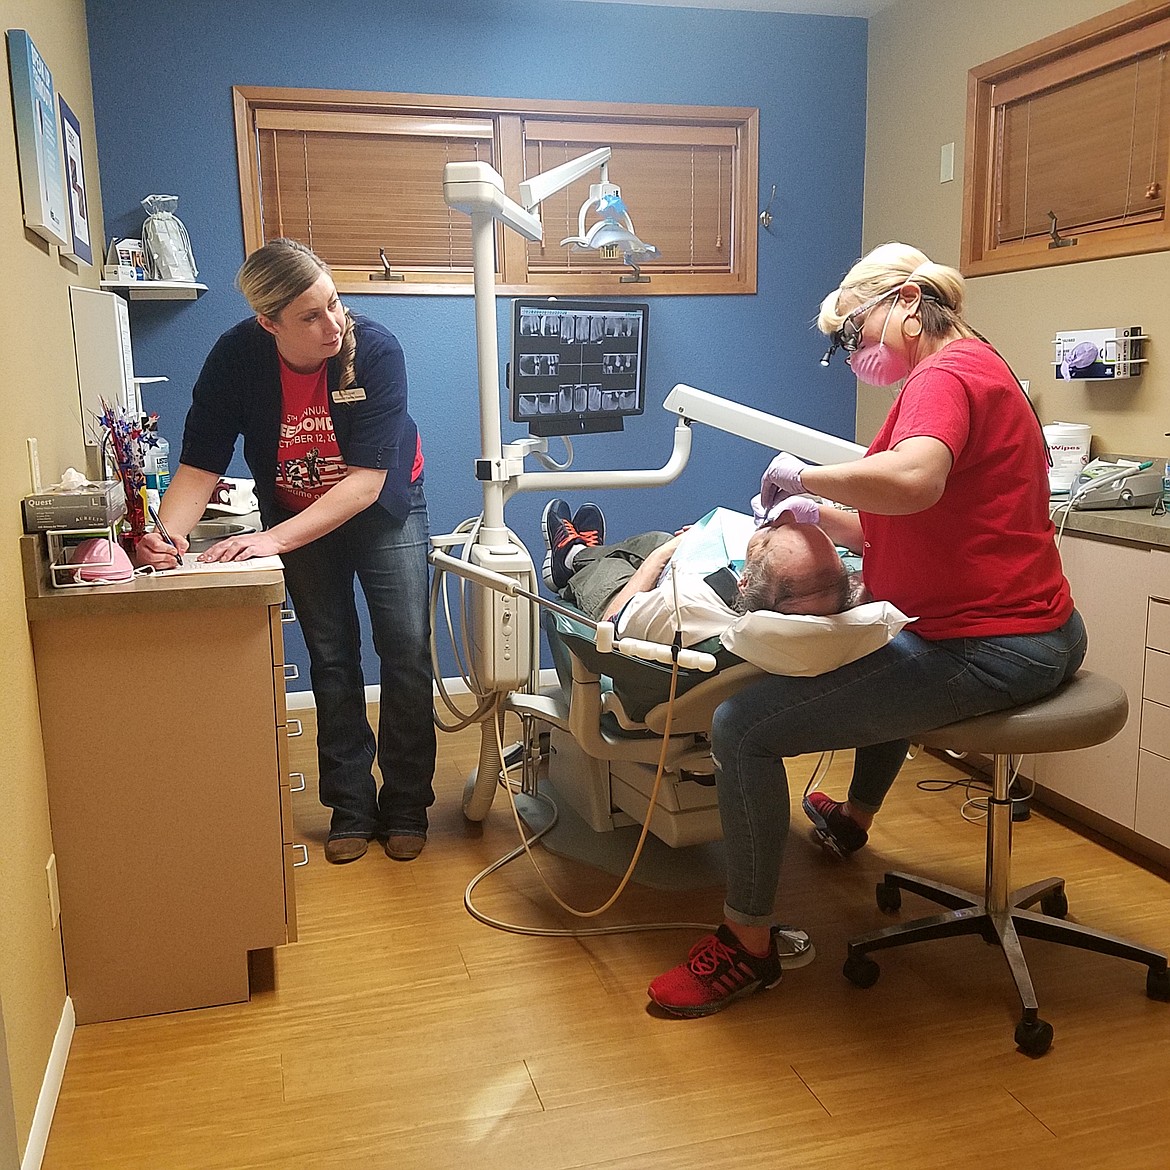 HOLLY PASZCZYNSKA/Press
Lindsay Von Beheren (left) and Jay Langston (right) perform free dental services to a local veteran on Tuesday for Freedom Day USA 2017 at Advanced Family Dentistry in Coeur d&#146;Alene.